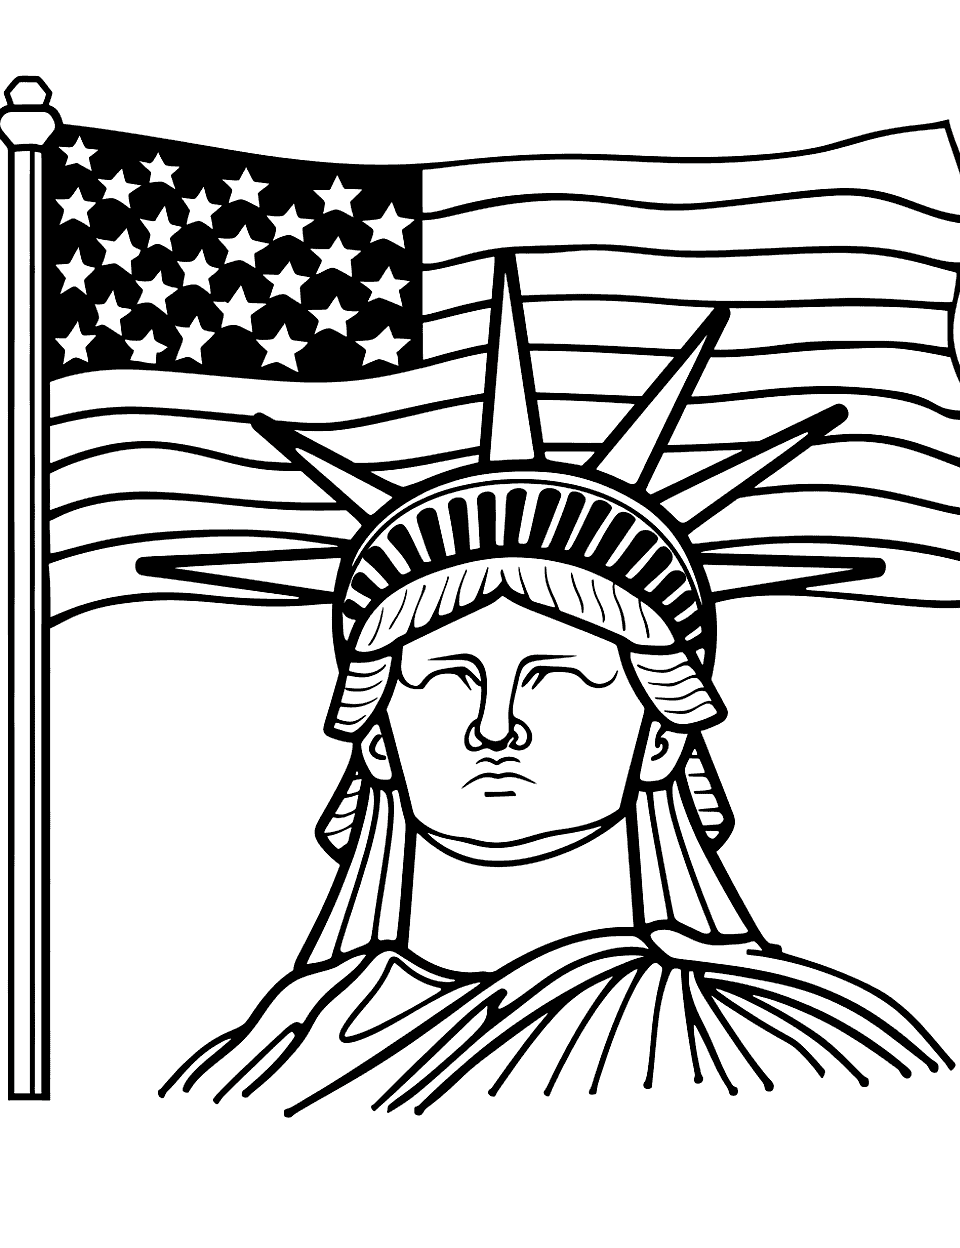 Statue of Liberty Close-Up American Flag Coloring Page - A close-up of the Statue of Liberty’s face with the American flag in the background.